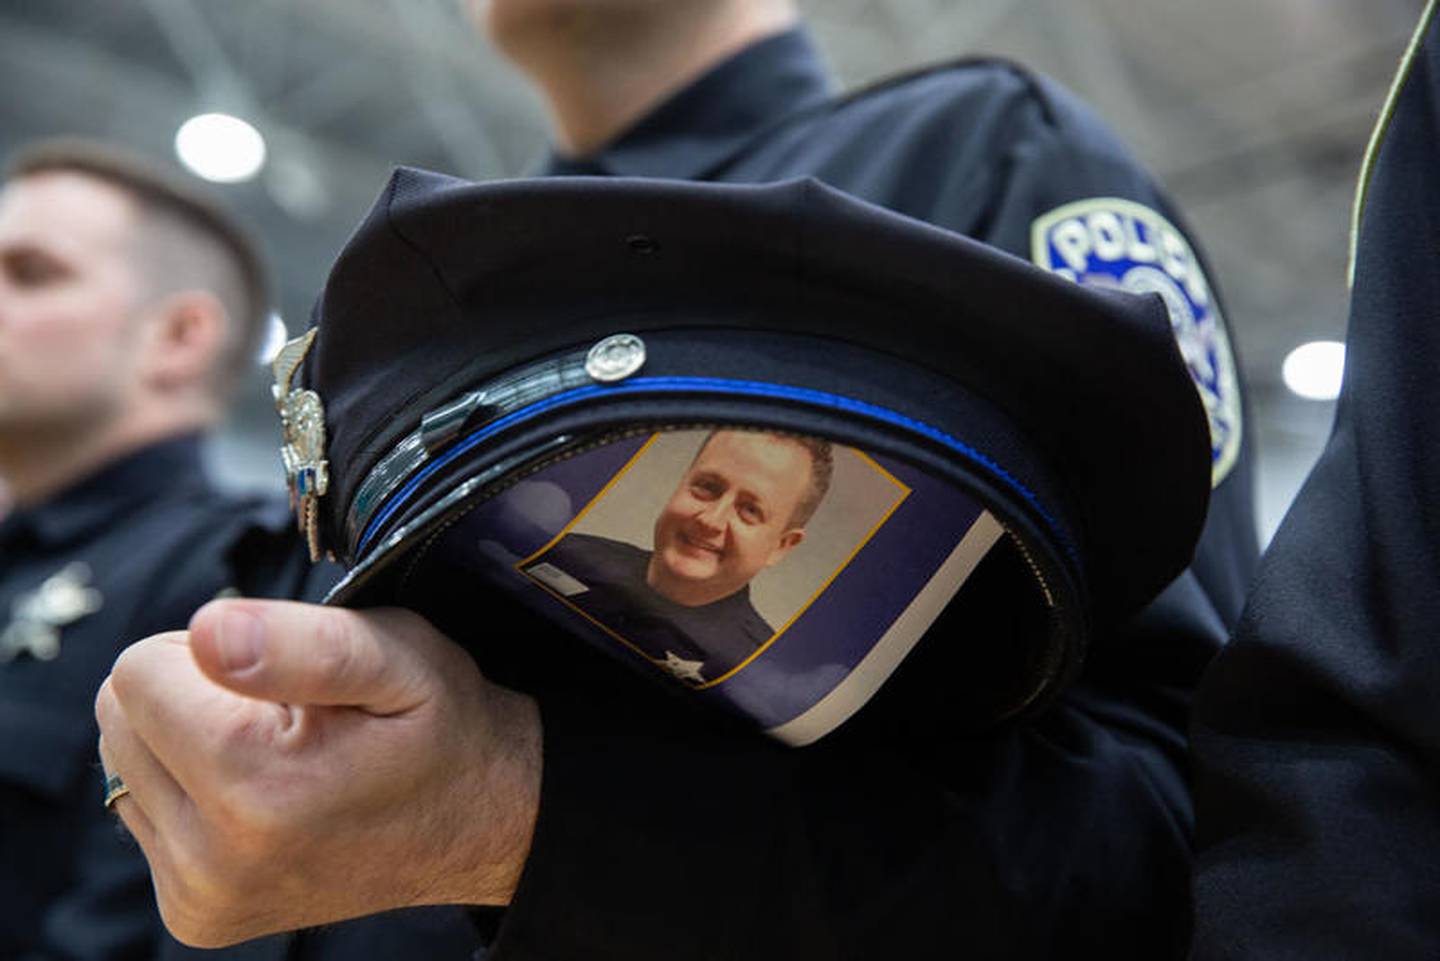 A program is tucked inside an officer's hat. Funeral services for McHenry County Deputy Sheriff Jacob Keltner is held at Woodstock North High School on Wednesday, March 13, 2019.